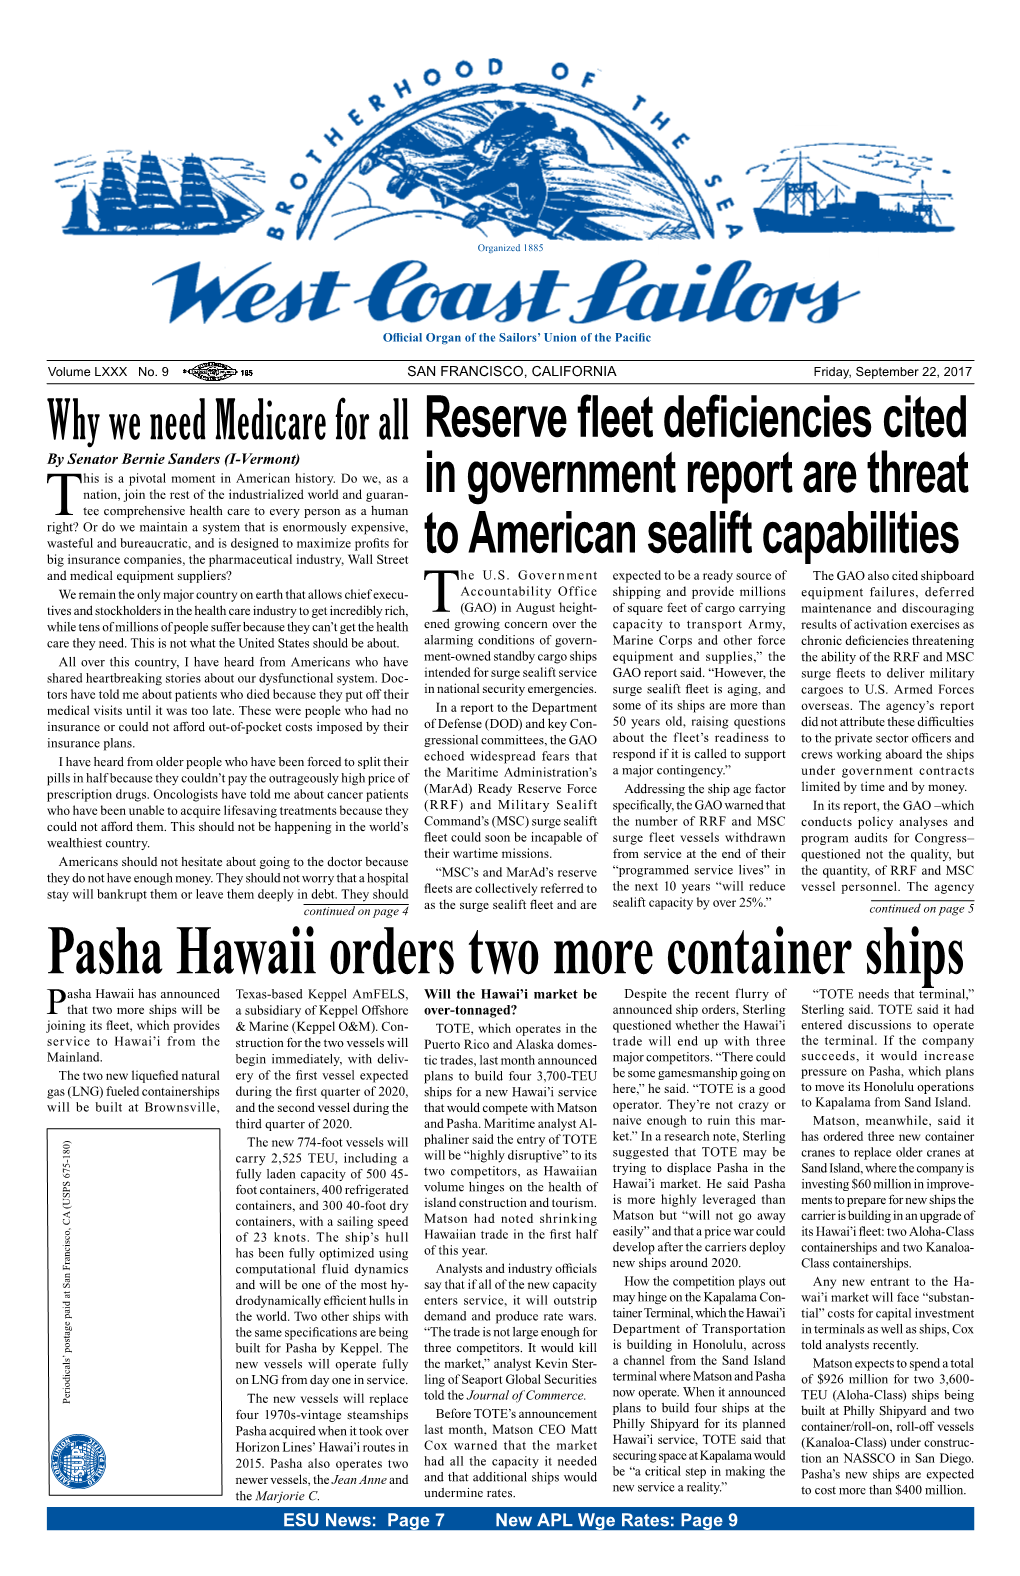 Pasha Hawaii Orders Two More Container Ships